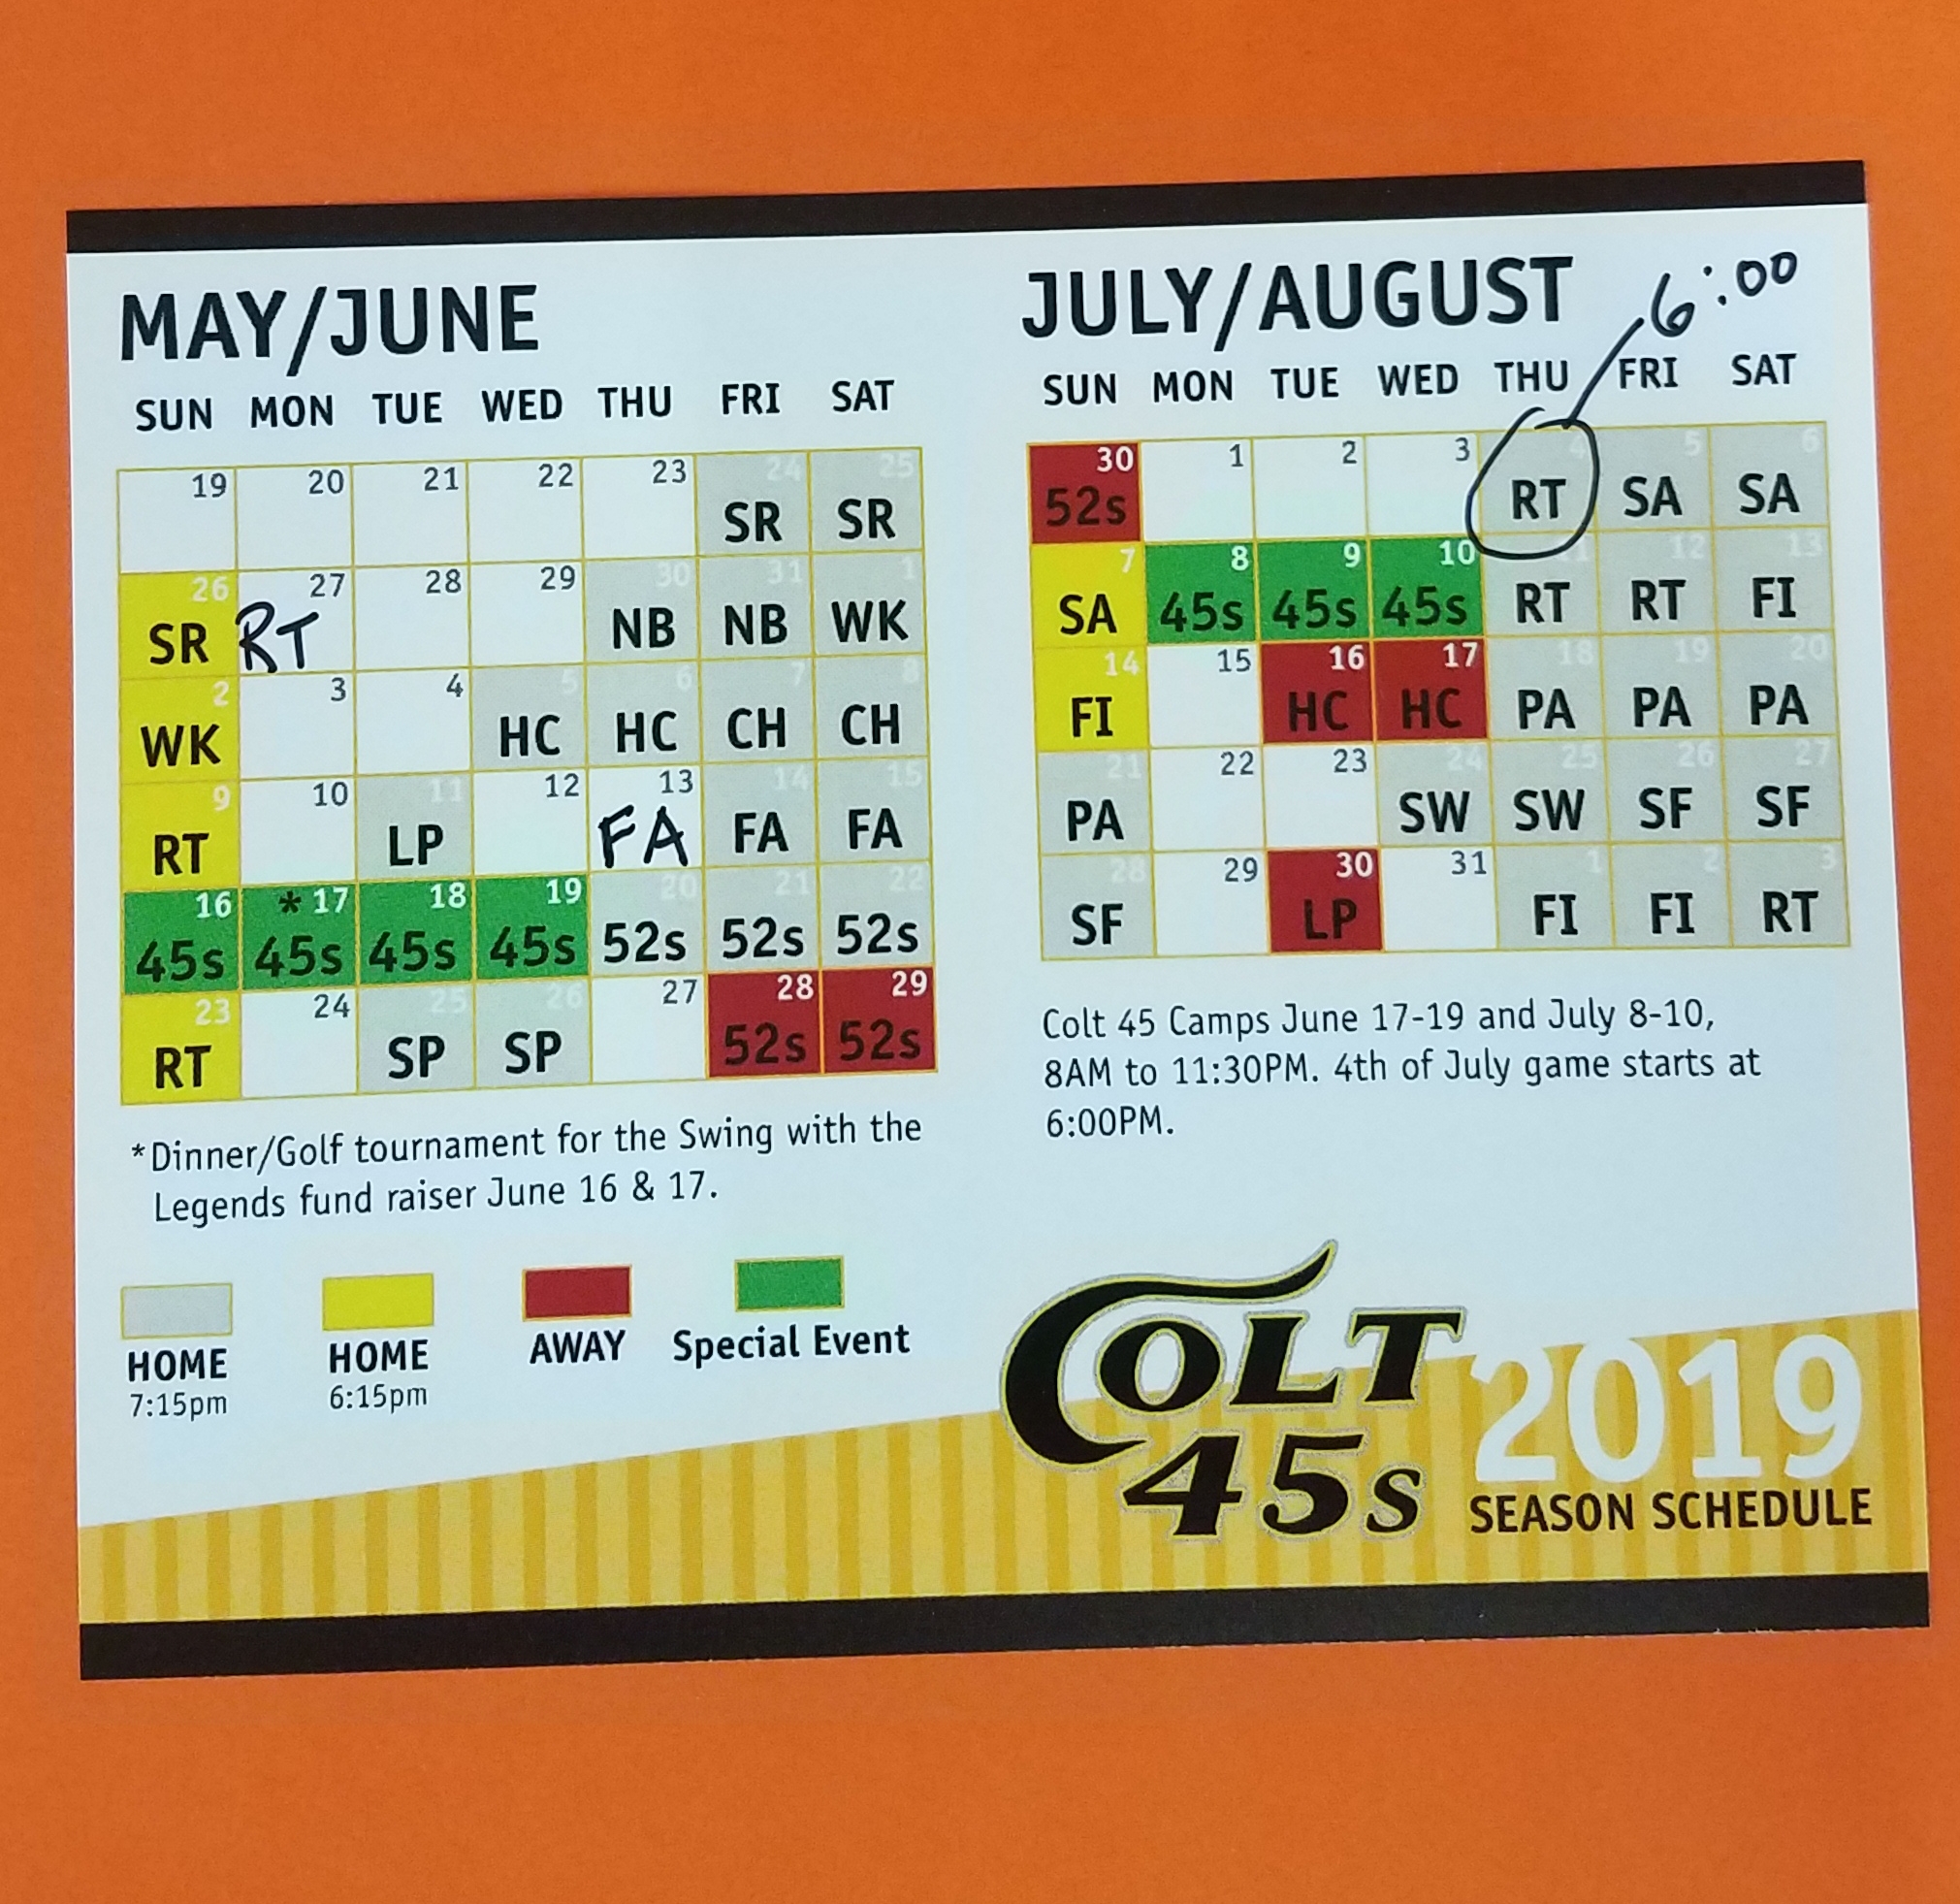 The REALLY Corrected 2019 Pocket Schedule